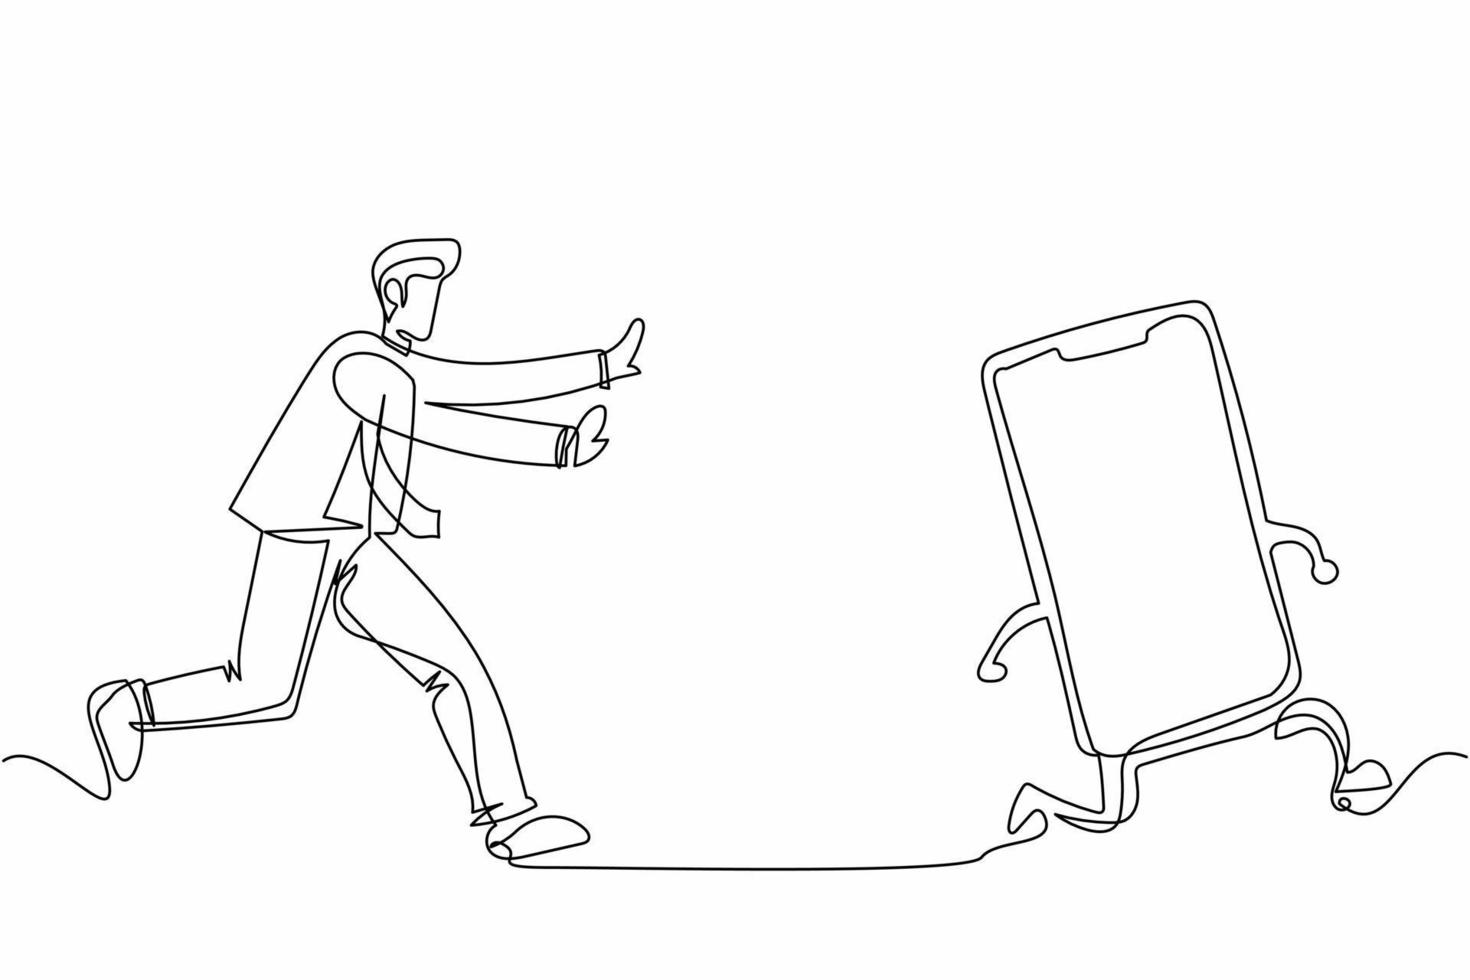 Continuous one line drawing businessman run chasing try to catch smartphone. Concept of talking, communication, technology, speaking. Business metaphor. Single line design vector graphic illustration